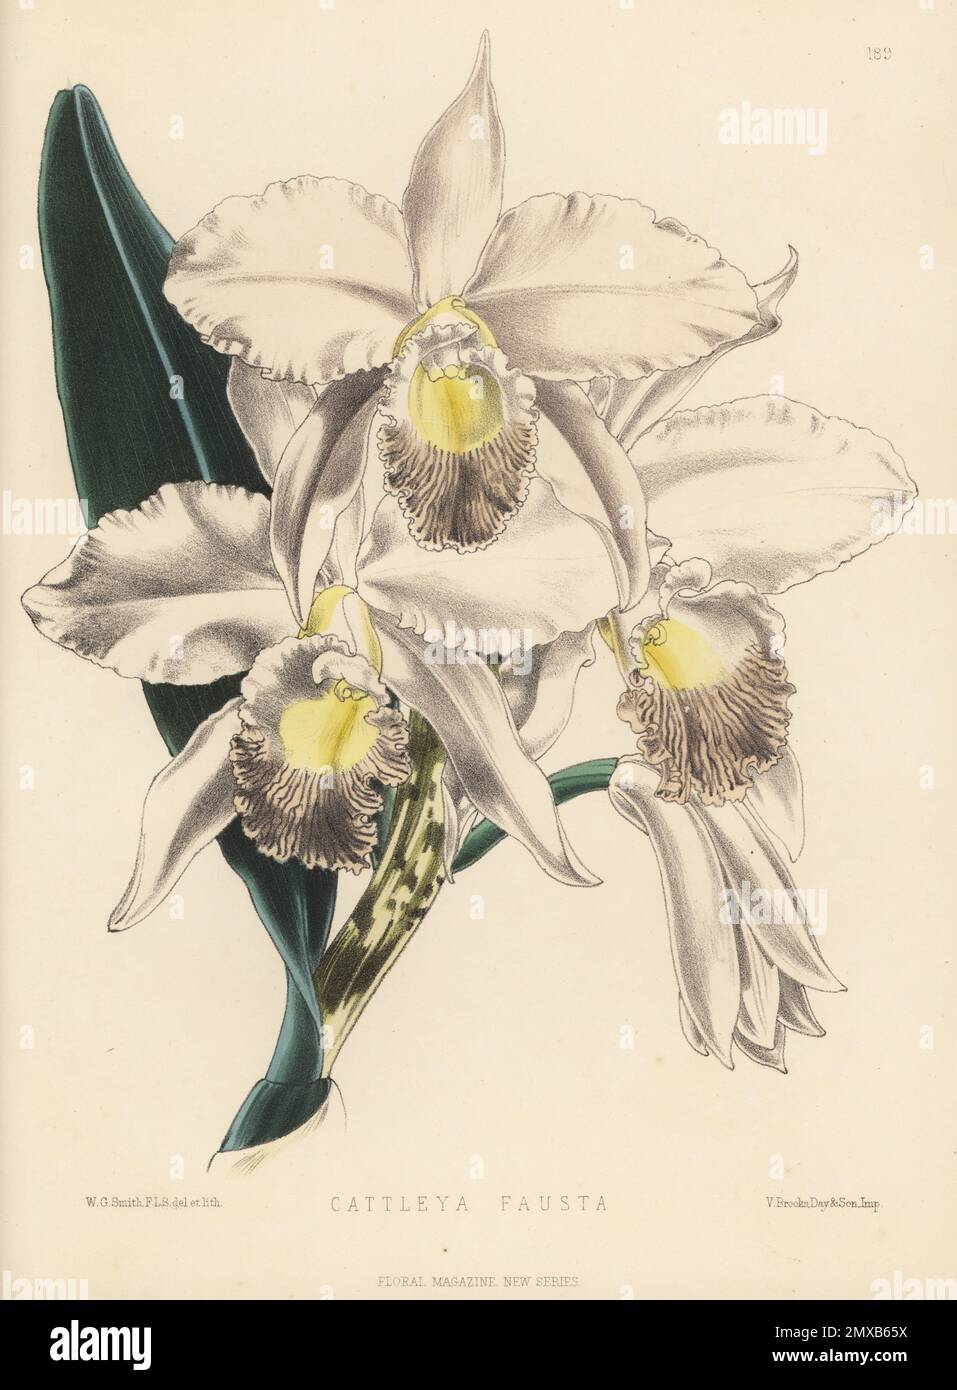 Cattleya orchid hybrid, Cattleya x fausta. Cross of C. loddigesii and C. exoniensis. Sold by James Veitch and Sons, Chelsea. Handcolored botanical illustration drawn and lithographed by Worthington George Smith from Henry Honywood Dombrain's Floral Magazine, New Series, Volume 4, L. Reeve, London, 1875. Lithograph printed by Vincent Brooks, Day & Son. Stock Photo